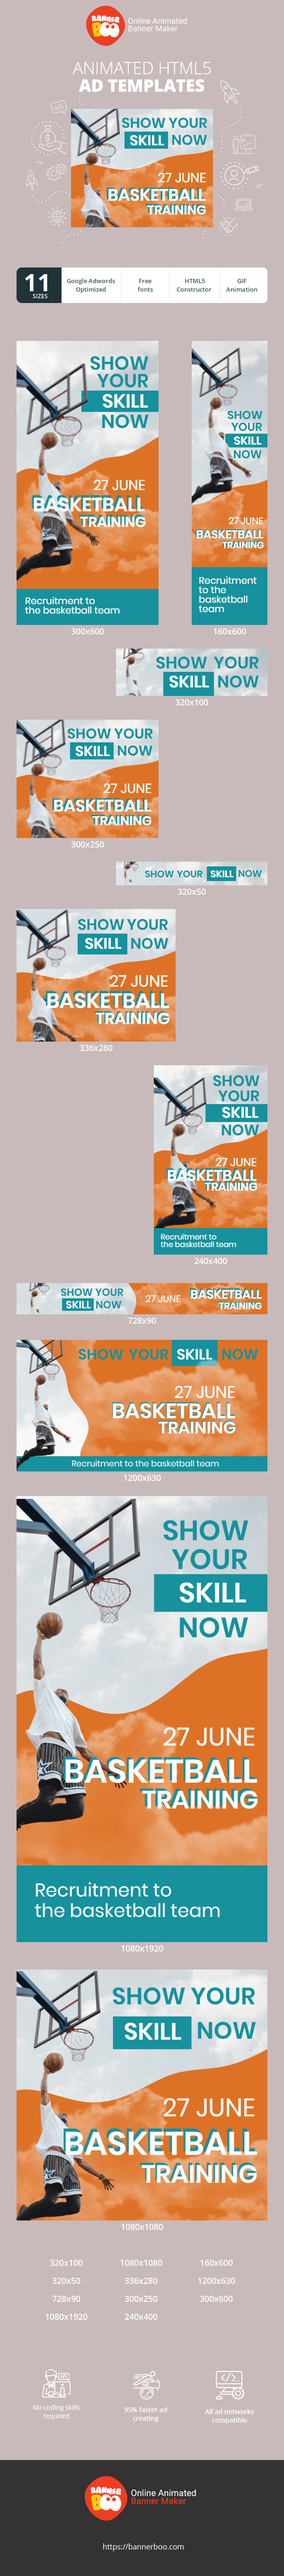 Banner ad template — Show Your Skill Now — Basketball Training Recruitment To The Basketball Team